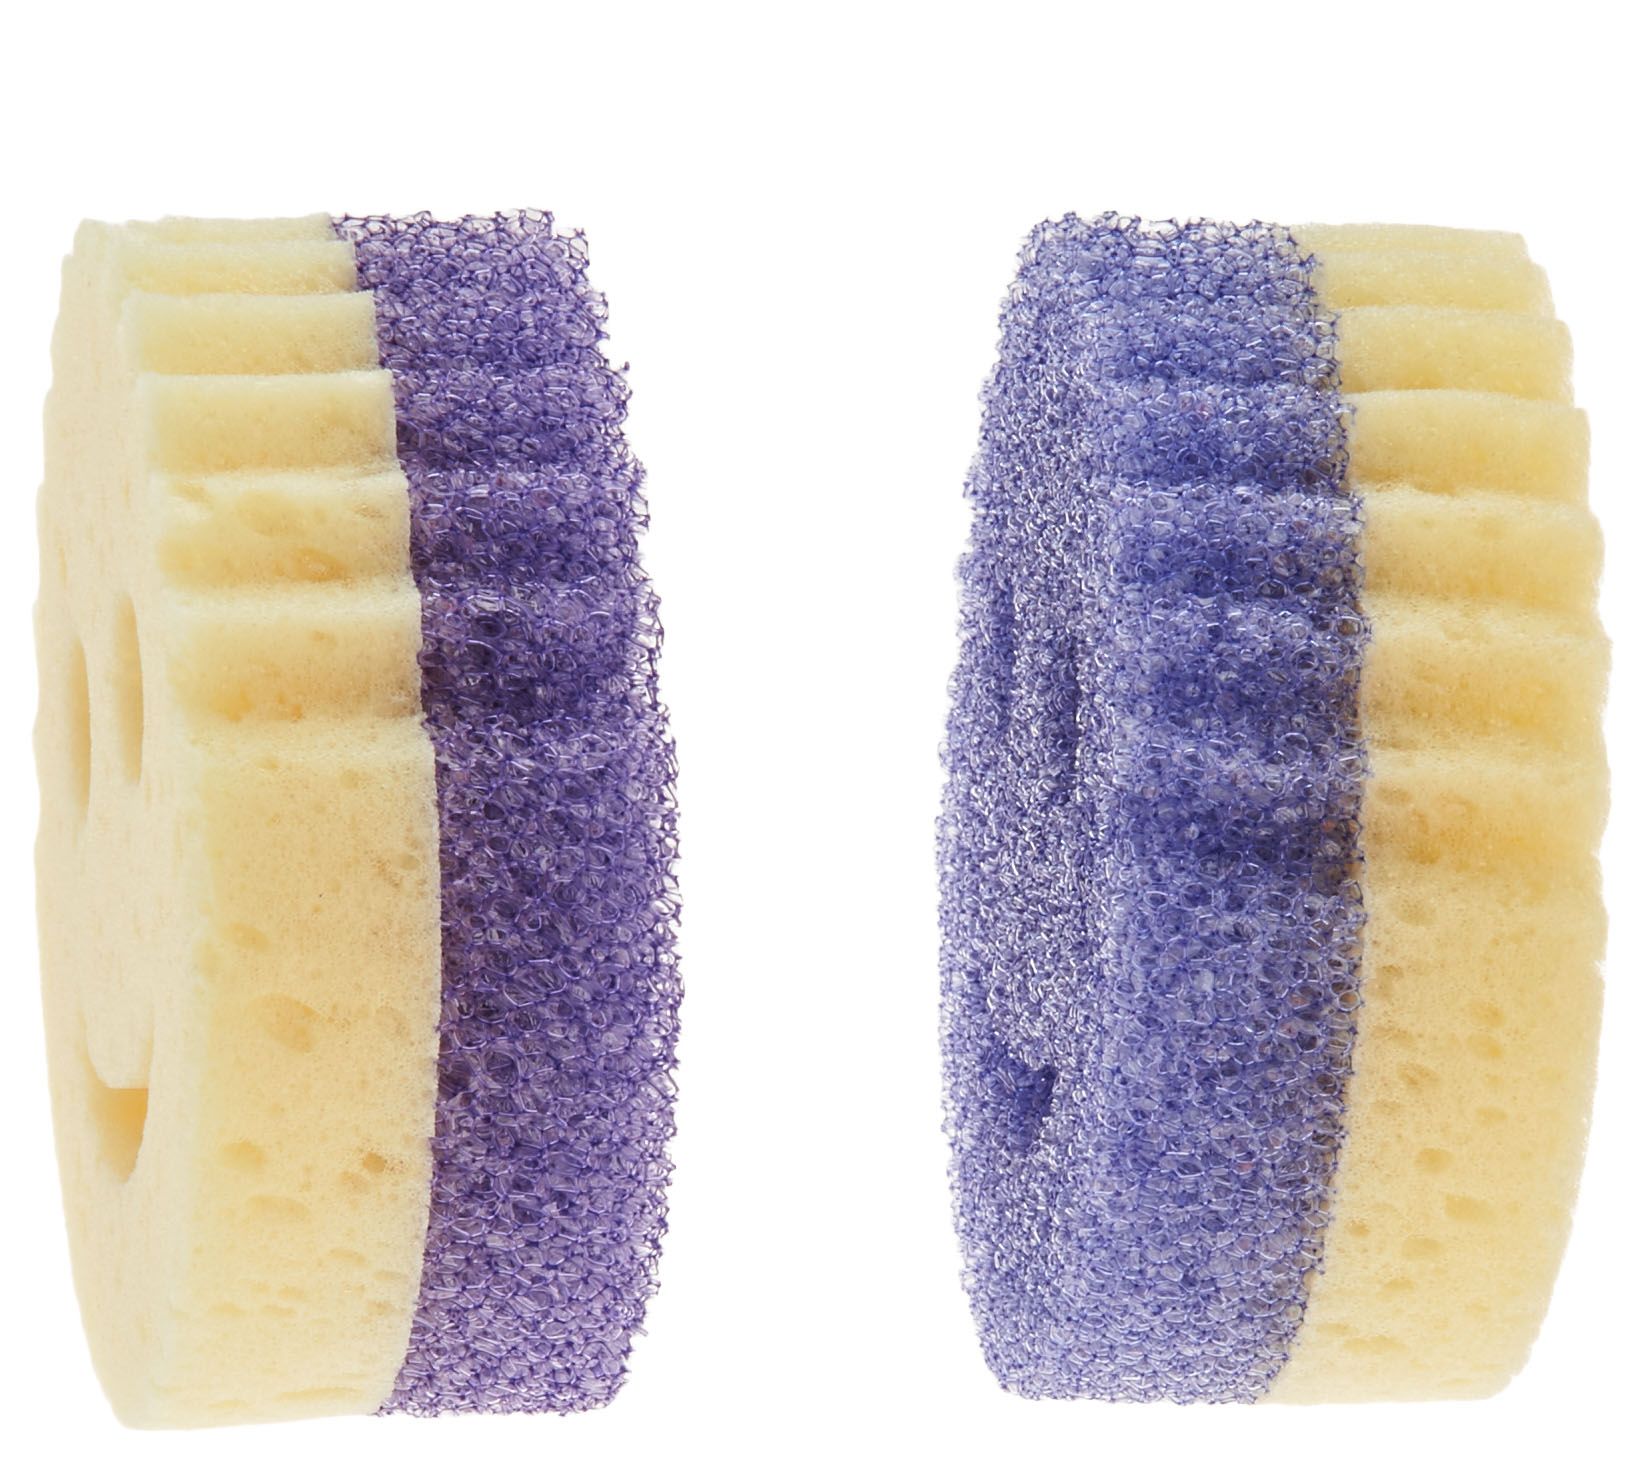  Handy Gourmet Sponge and Scrub Set-Interchangeable Cleaning  Unit, Multi : Health & Household